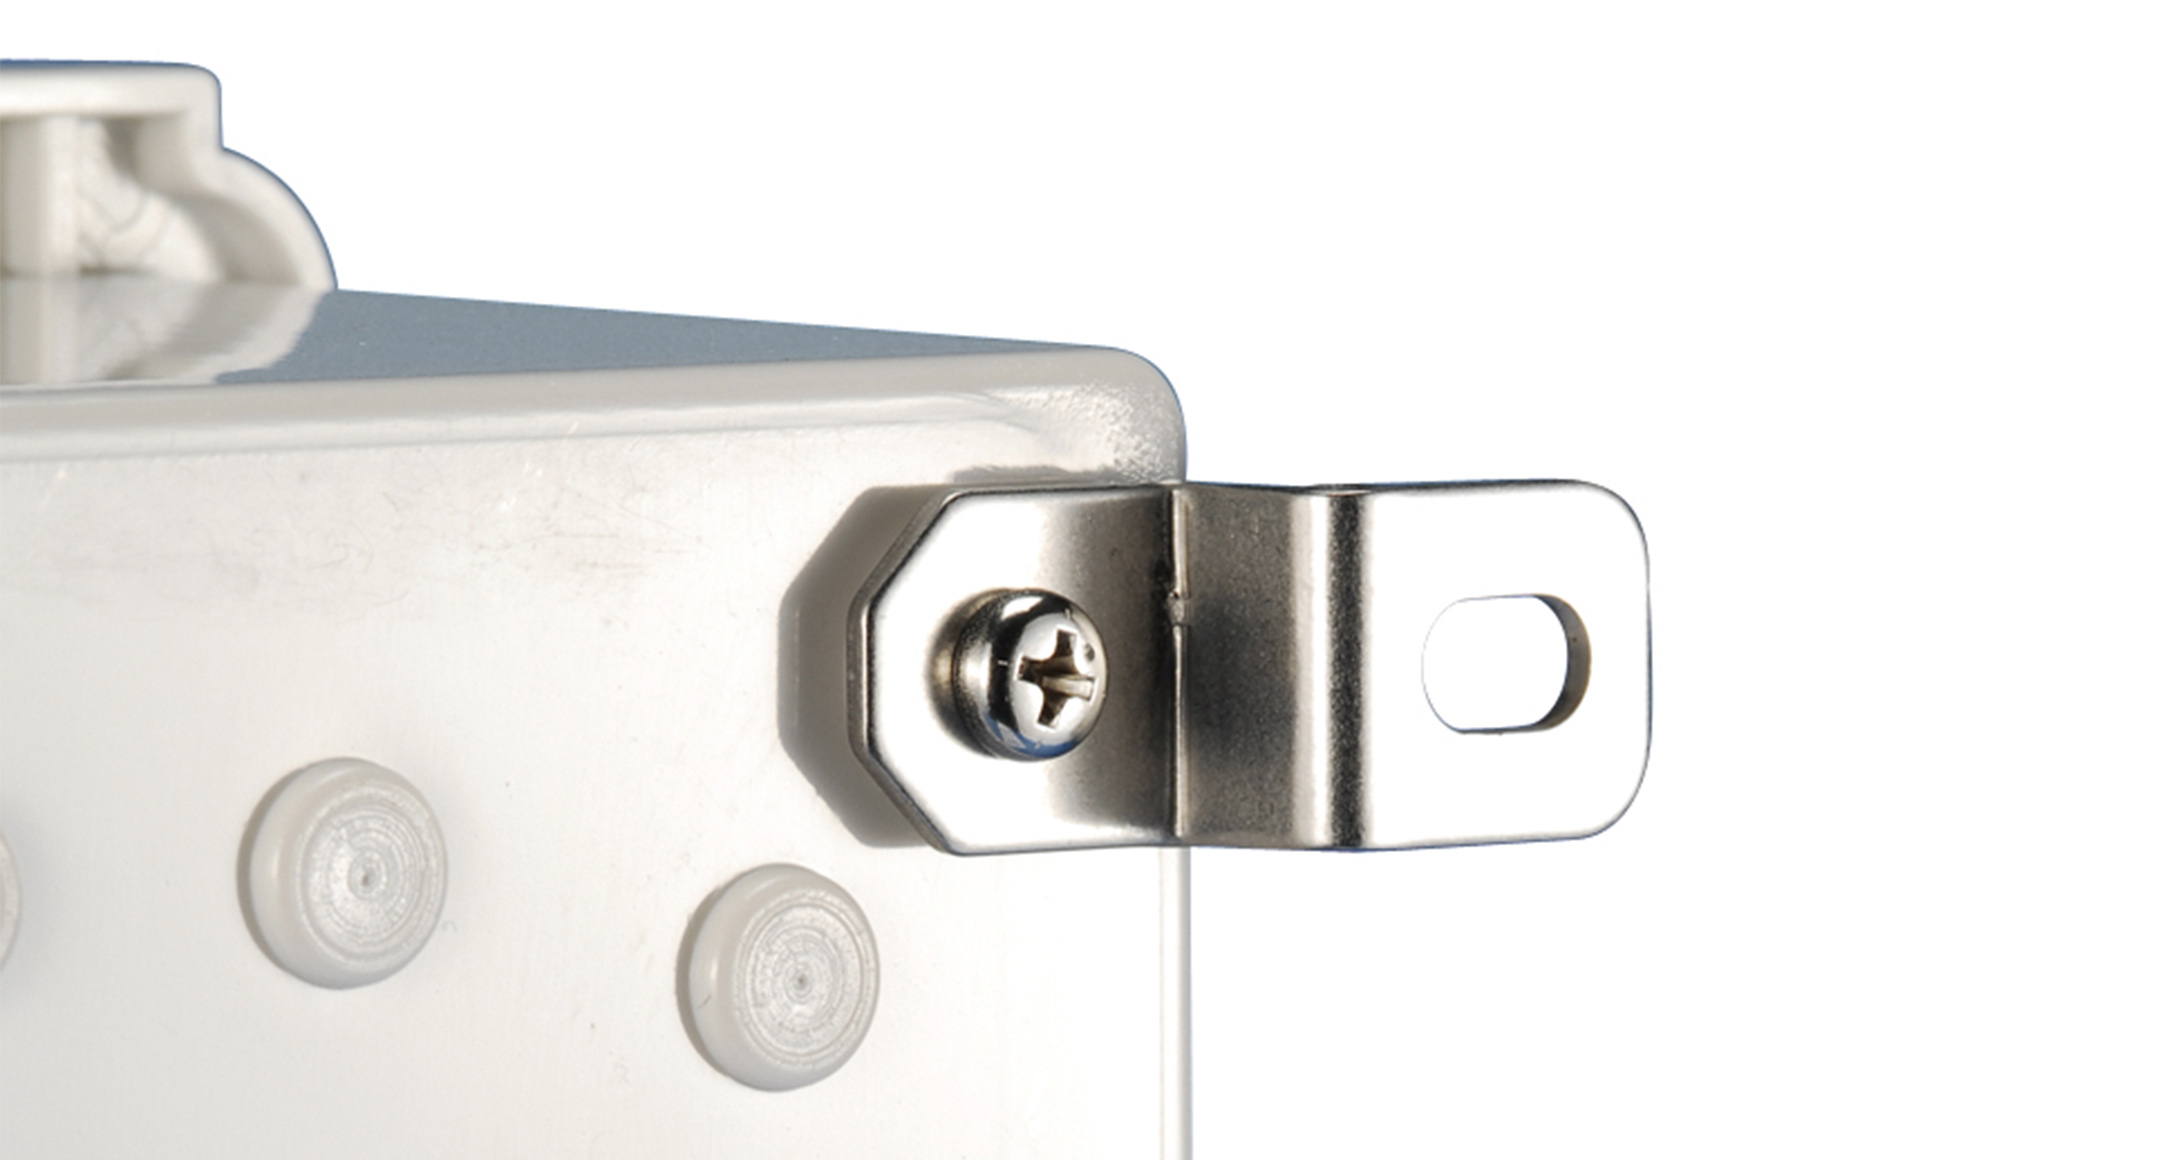 STAINLESS STEEL BRACKET for HINGED BOX - CK series